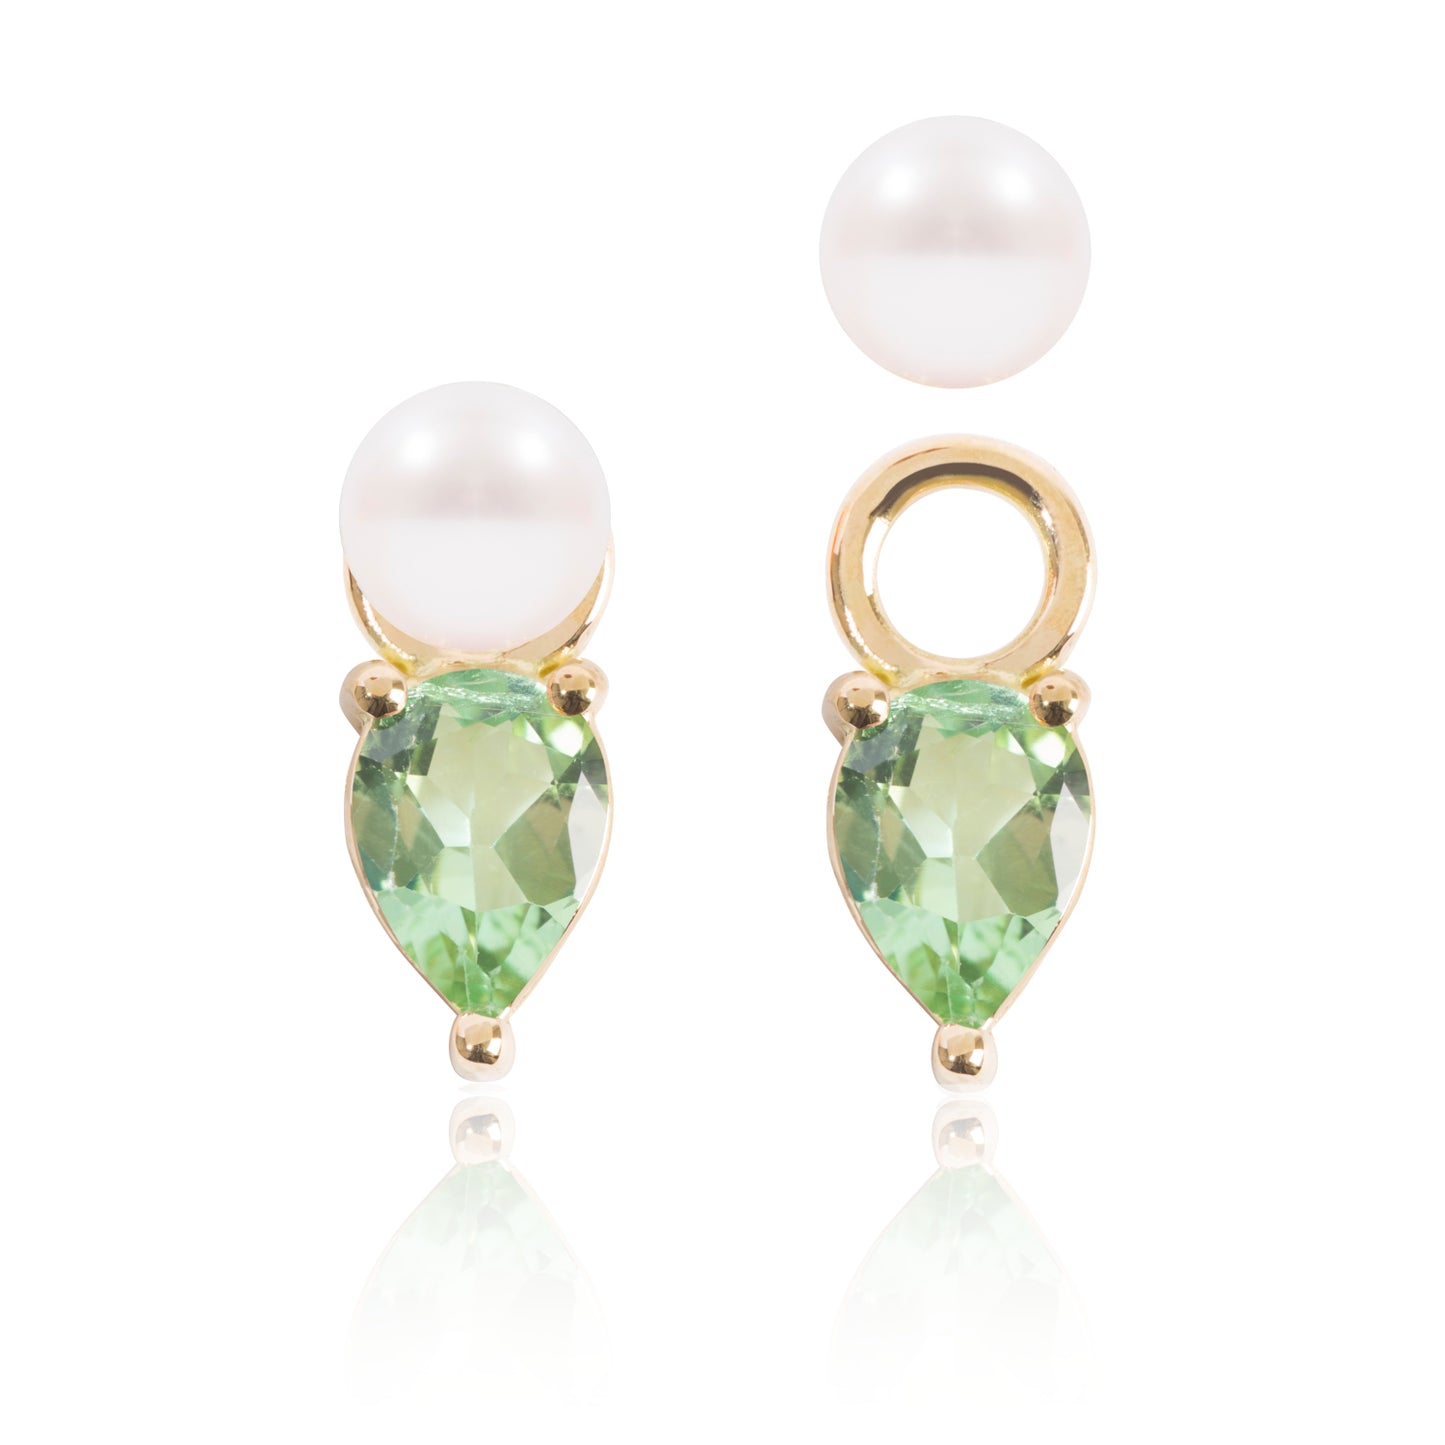 Mini Pearl and Bright Green Tourmaline Earring Pendants with one detached by McFarlane Fine Jewellery